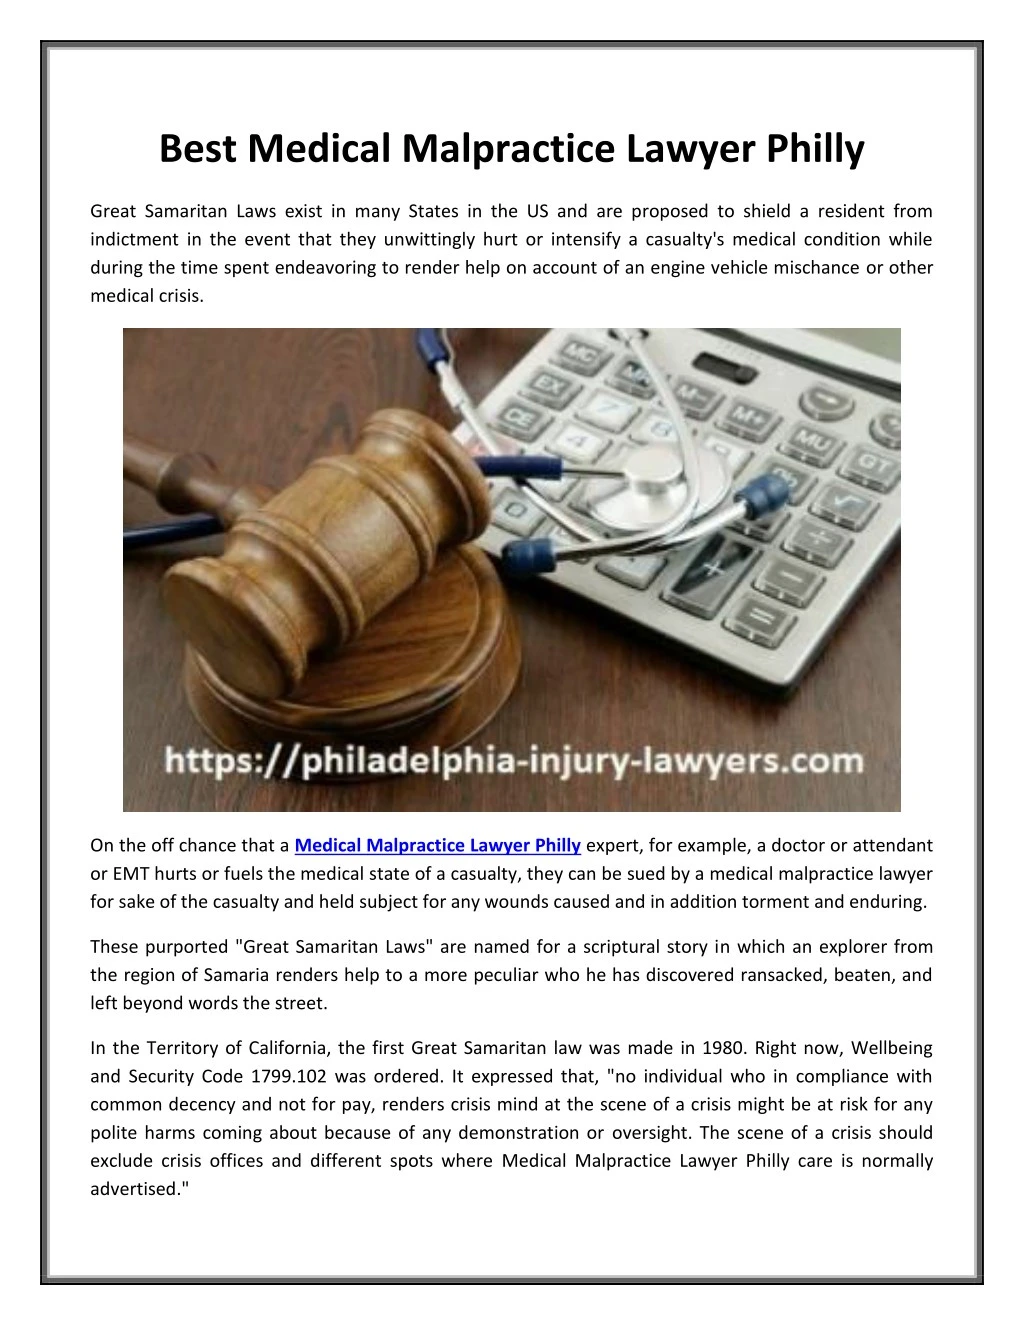 best medical malpractice lawyer philly